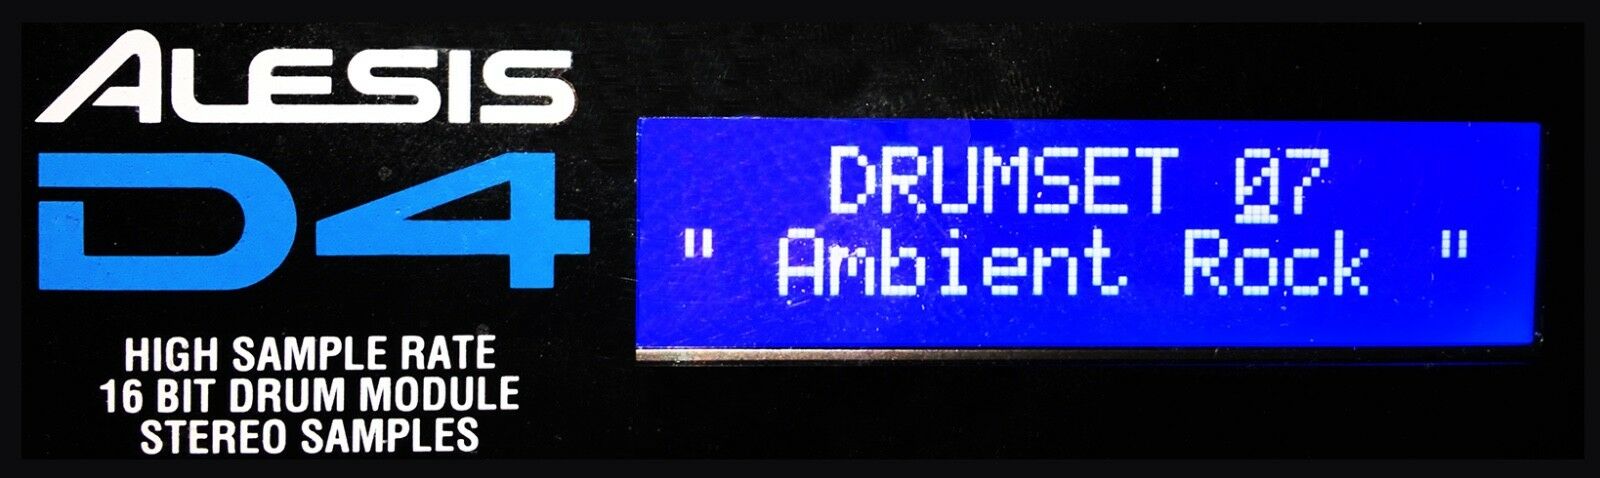 Alesis Lcd Display - D4 Drum Module - Blue - New D-4 Replacement Screen